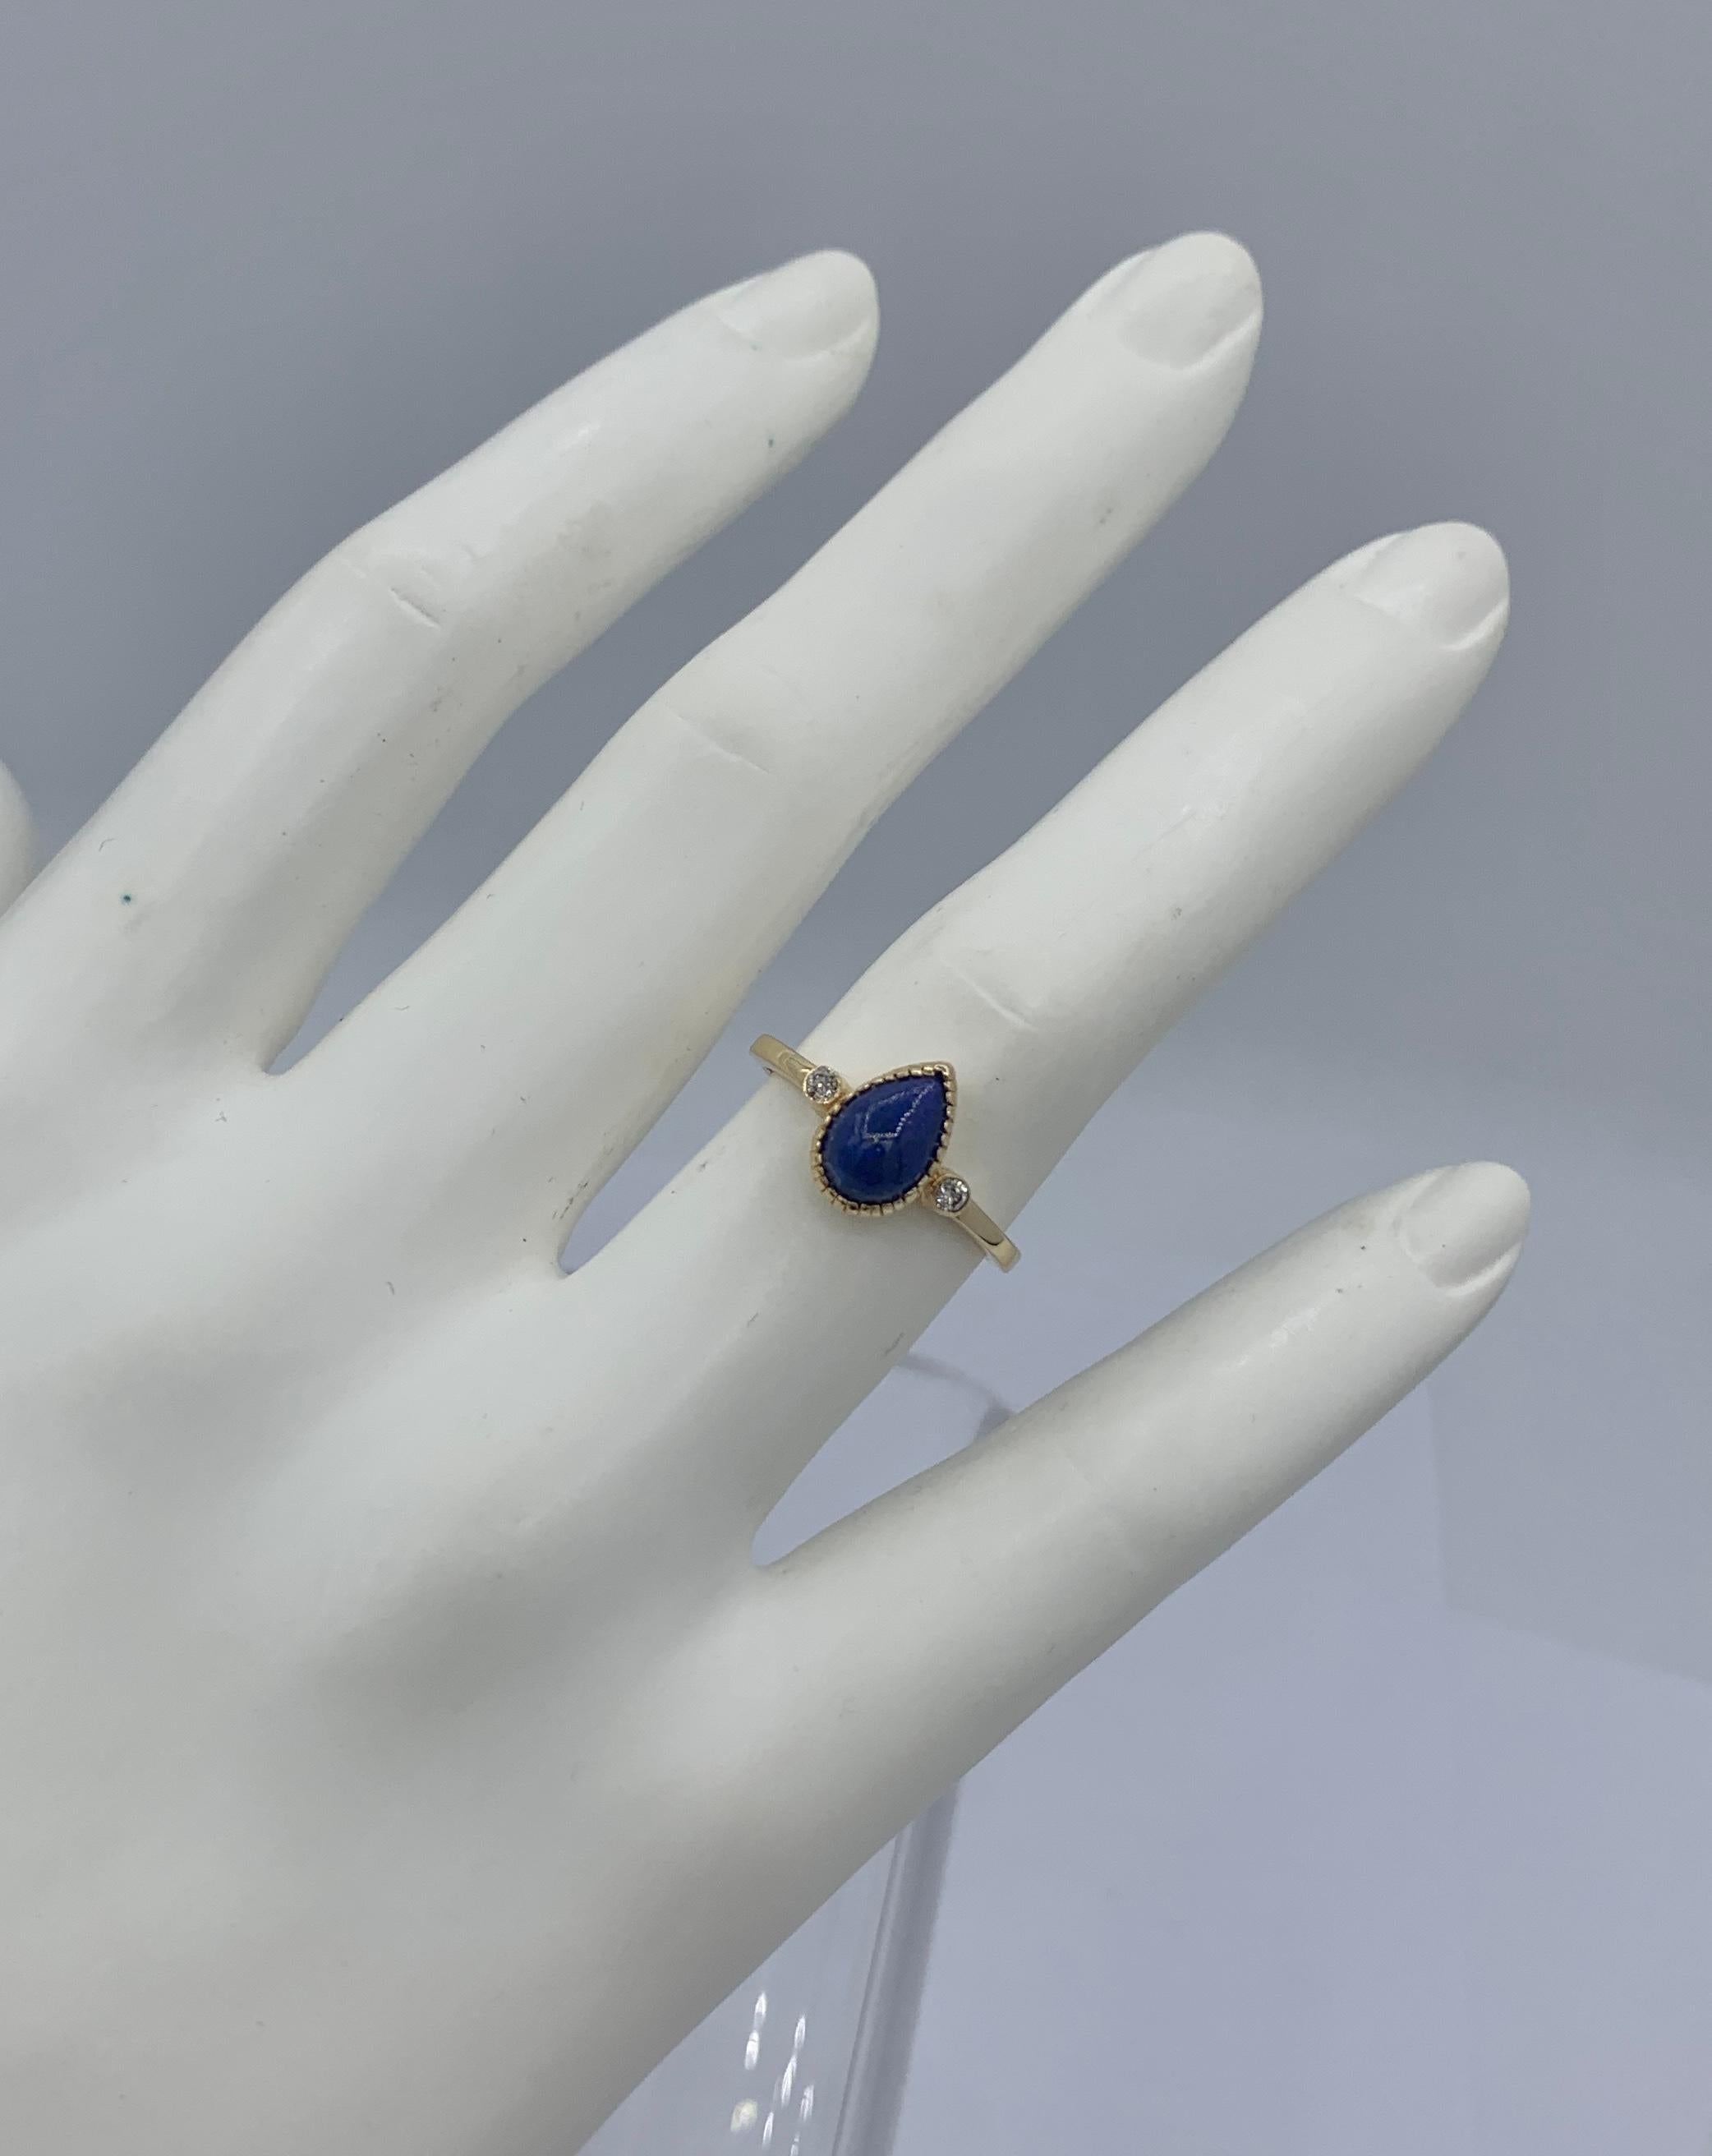 This is a gorgeous Mid-Century Modern Lapis Lazuli Diamond Ring in 14 Karat Yellow Gold.  The ring features a central blue Lapis Lazuli pear shape cabochon of great beauty.  The color of the lapis is gem quality blue.
On either side of the lapis are